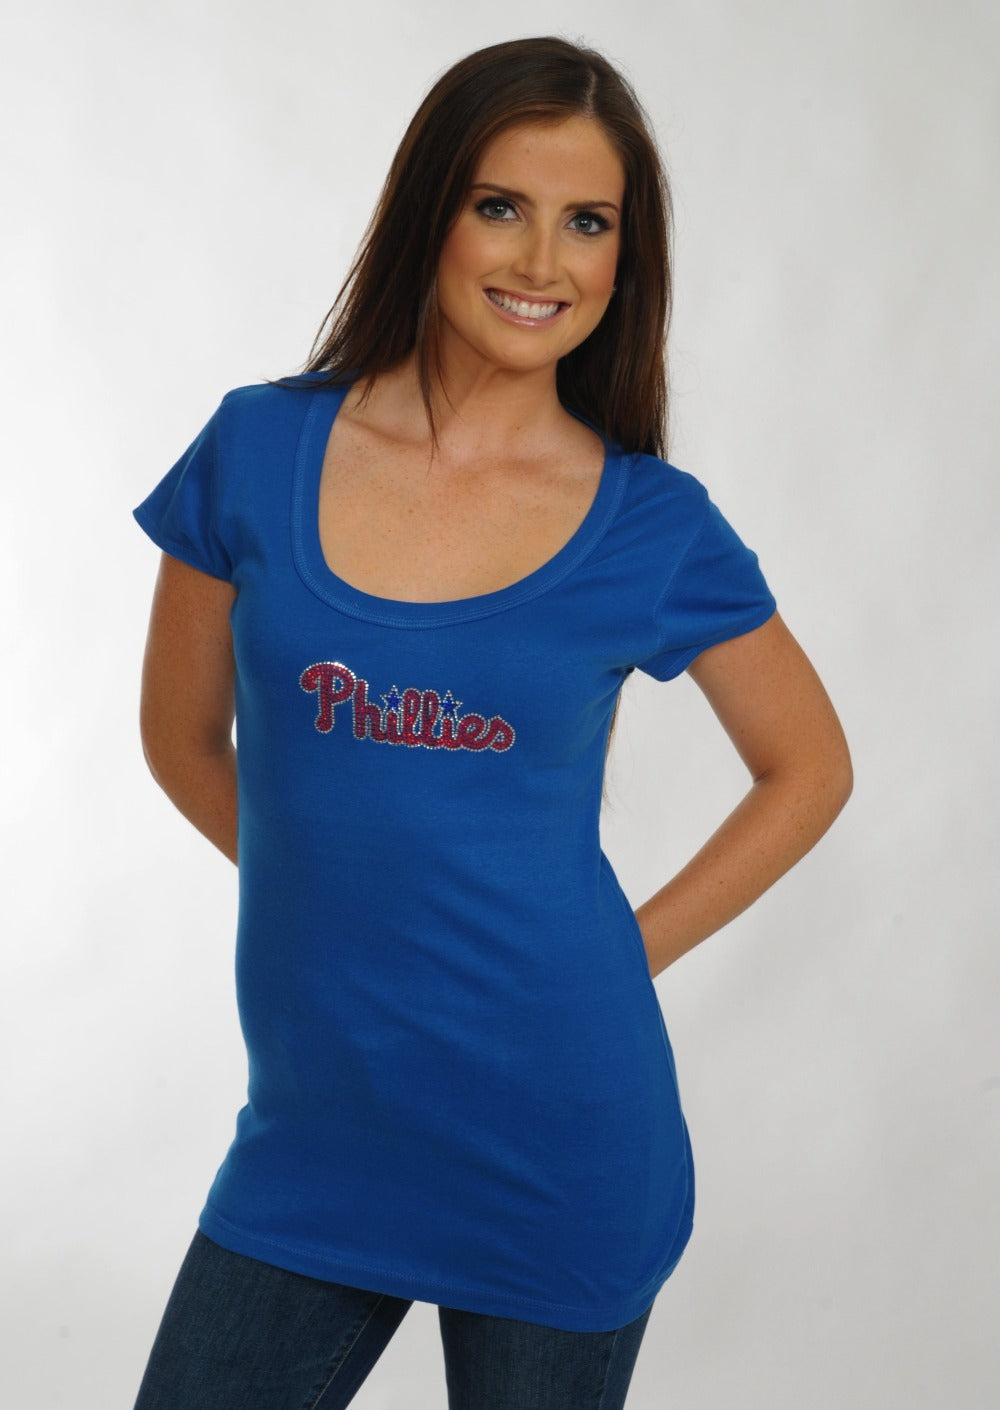 Philadelphia Phillies Scoop Neck Bling Top Royal Blue for Women (Free  Shipping) Szs Md, Lg & XL